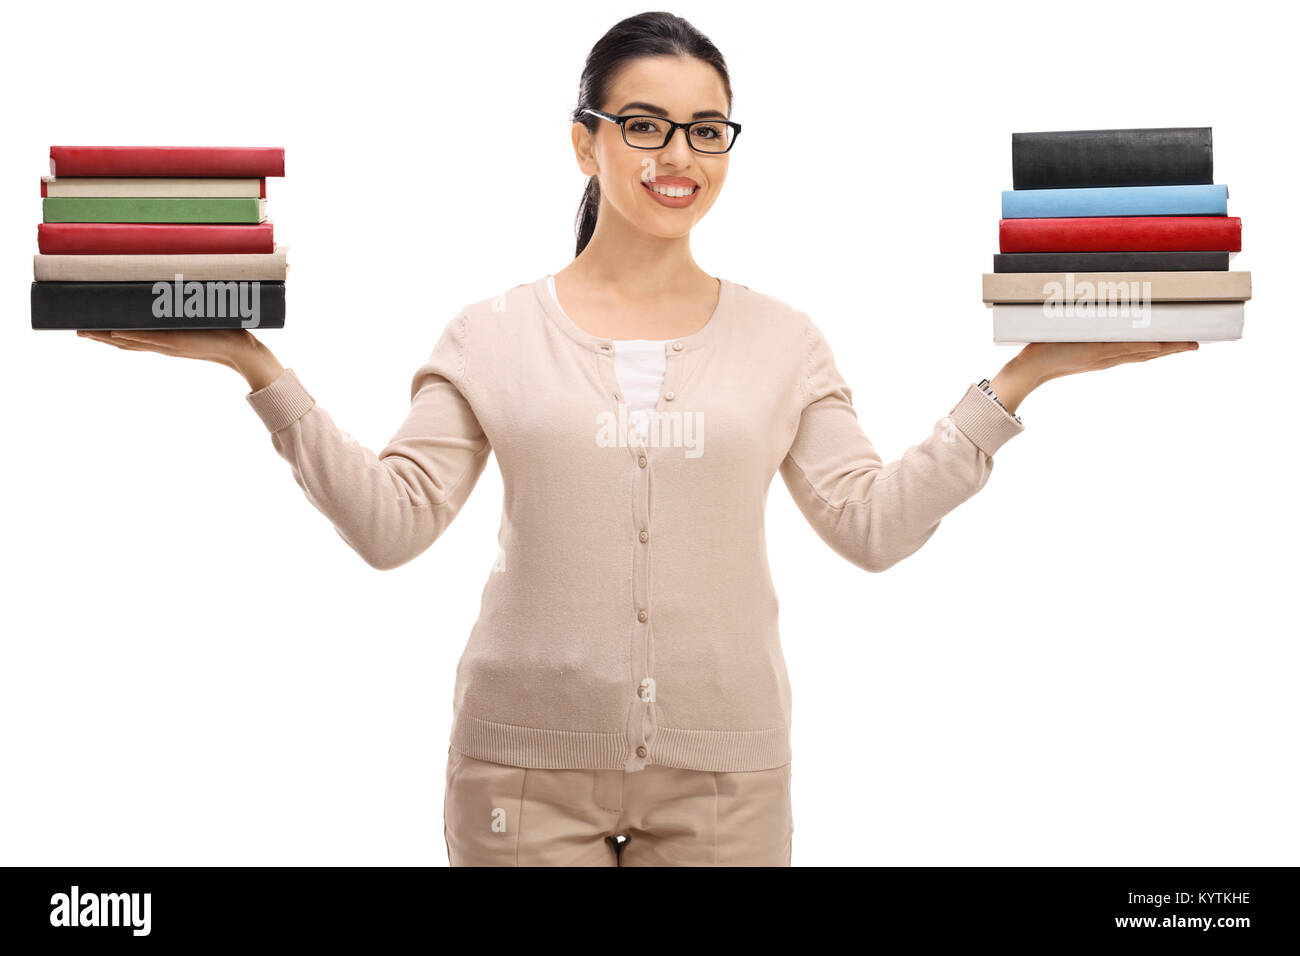 Female teacher with book stacks isolated on white background Stock Photo